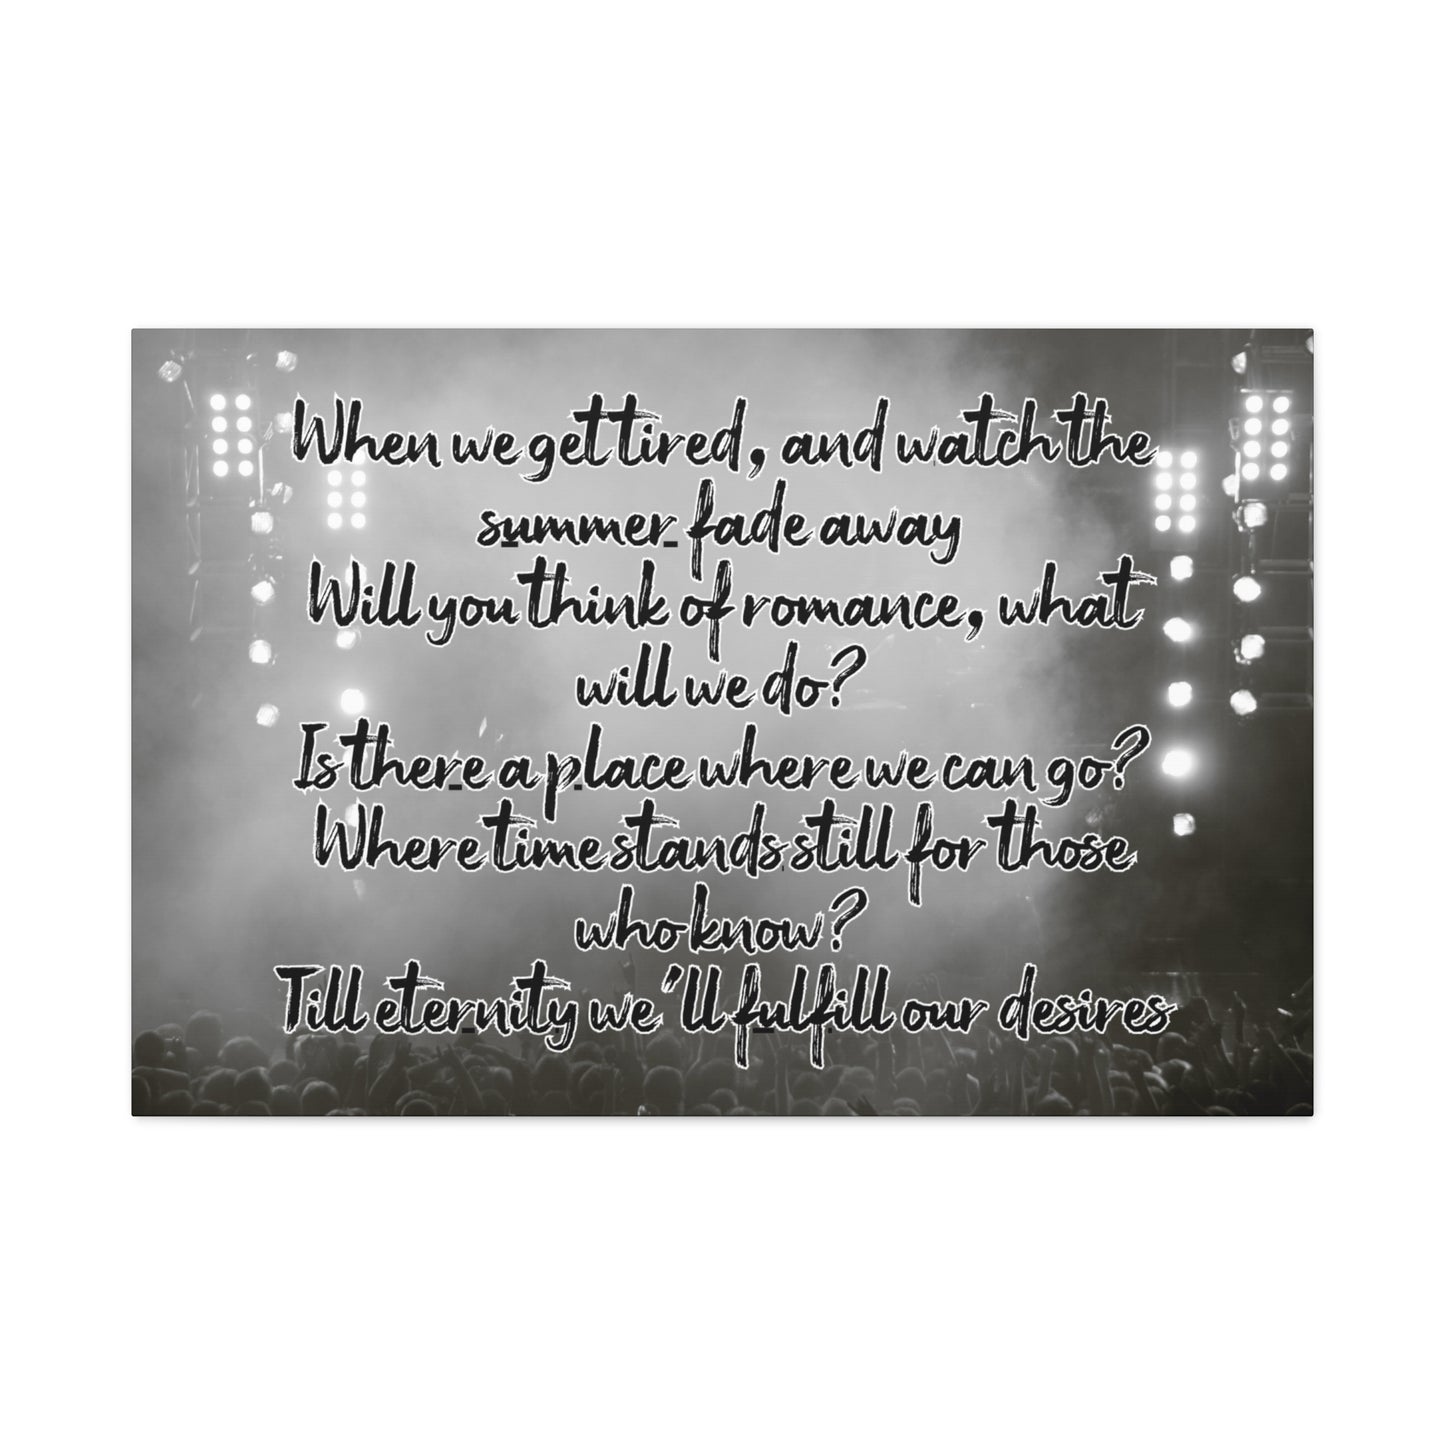 "Custom Song Lyrics" Wall Art - Weave Got Gifts - Unique Gifts You Won’t Find Anywhere Else!